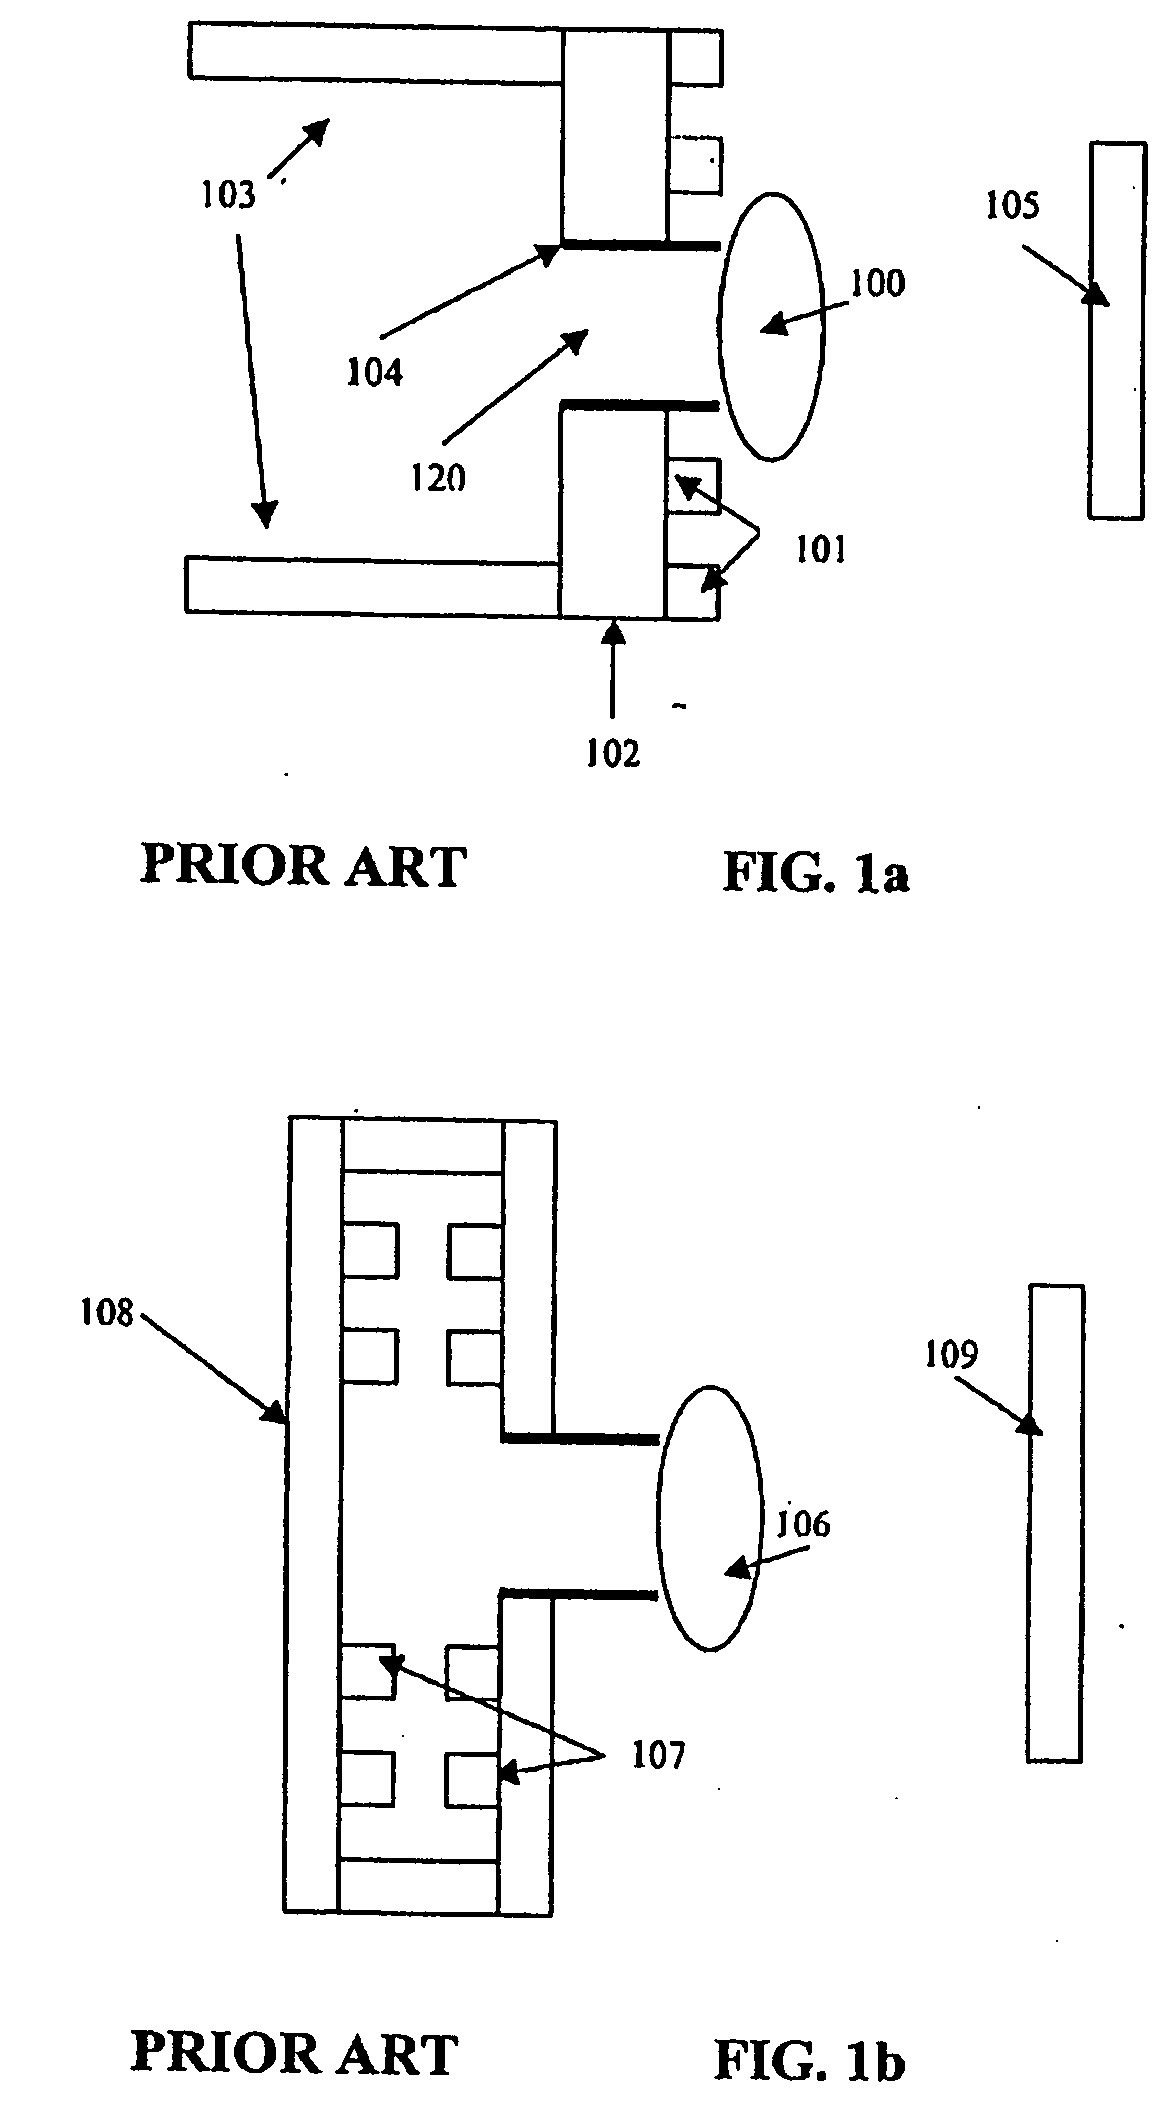 System and method for illuminating and reading optical codes imprinted or displayed on reflective surfaces